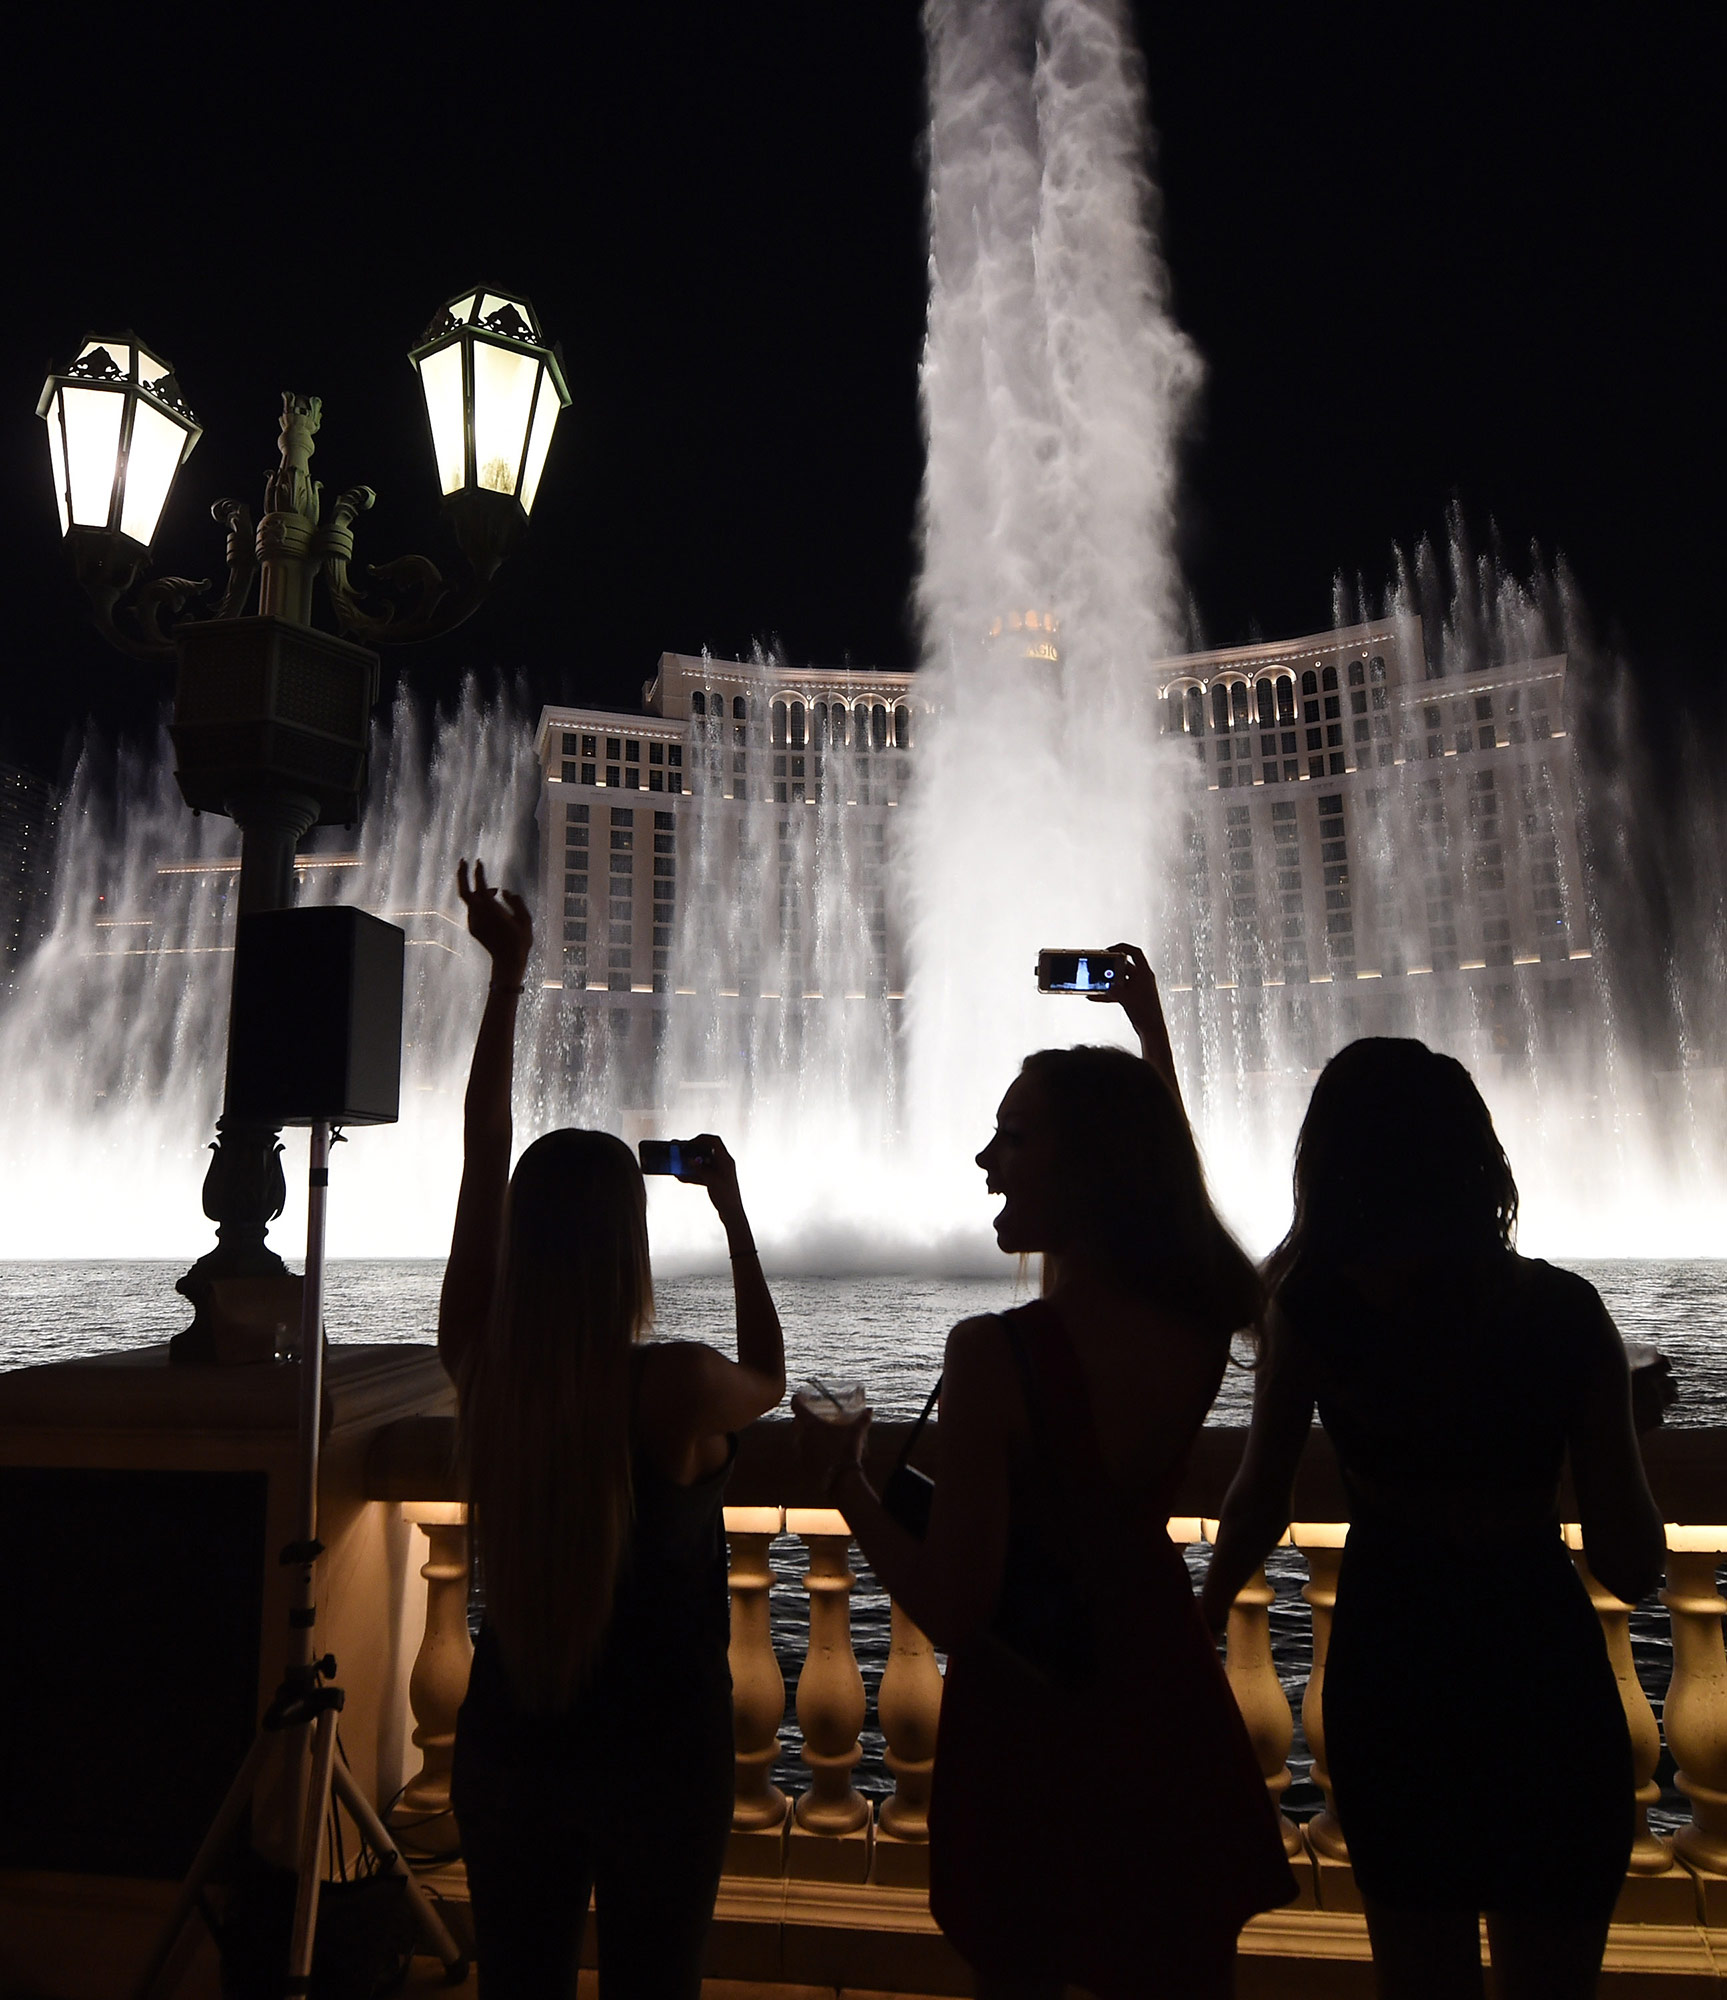 Crowds danced and enjoyed the new Fountains of Bellagio show set to an exclusive medley of Tiesto’s “Rocky,” “Red Lights” and “Footprints” off his new album. (Credit Ethan Miller for Bellagio)